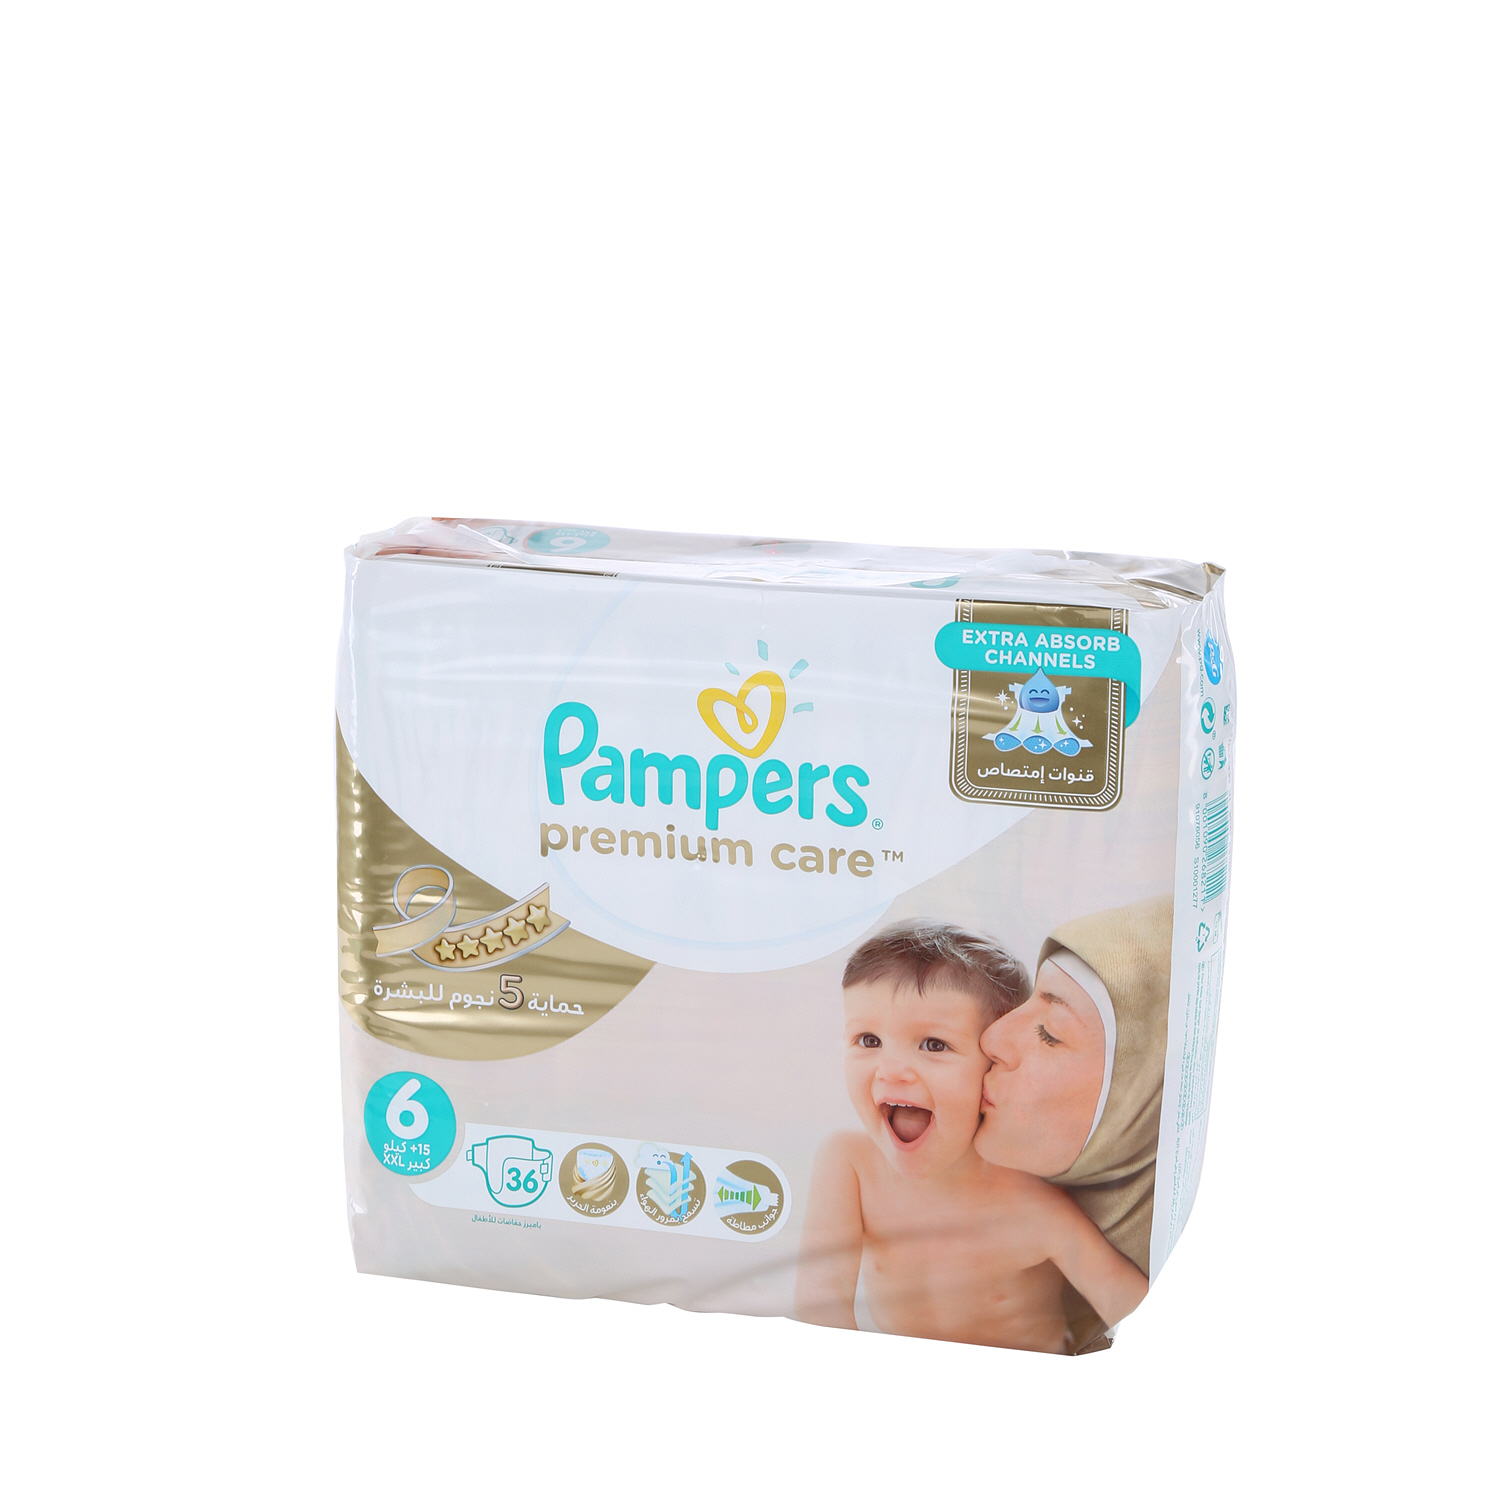 Pampers Premium Care Size.6 Baby 36 Pack